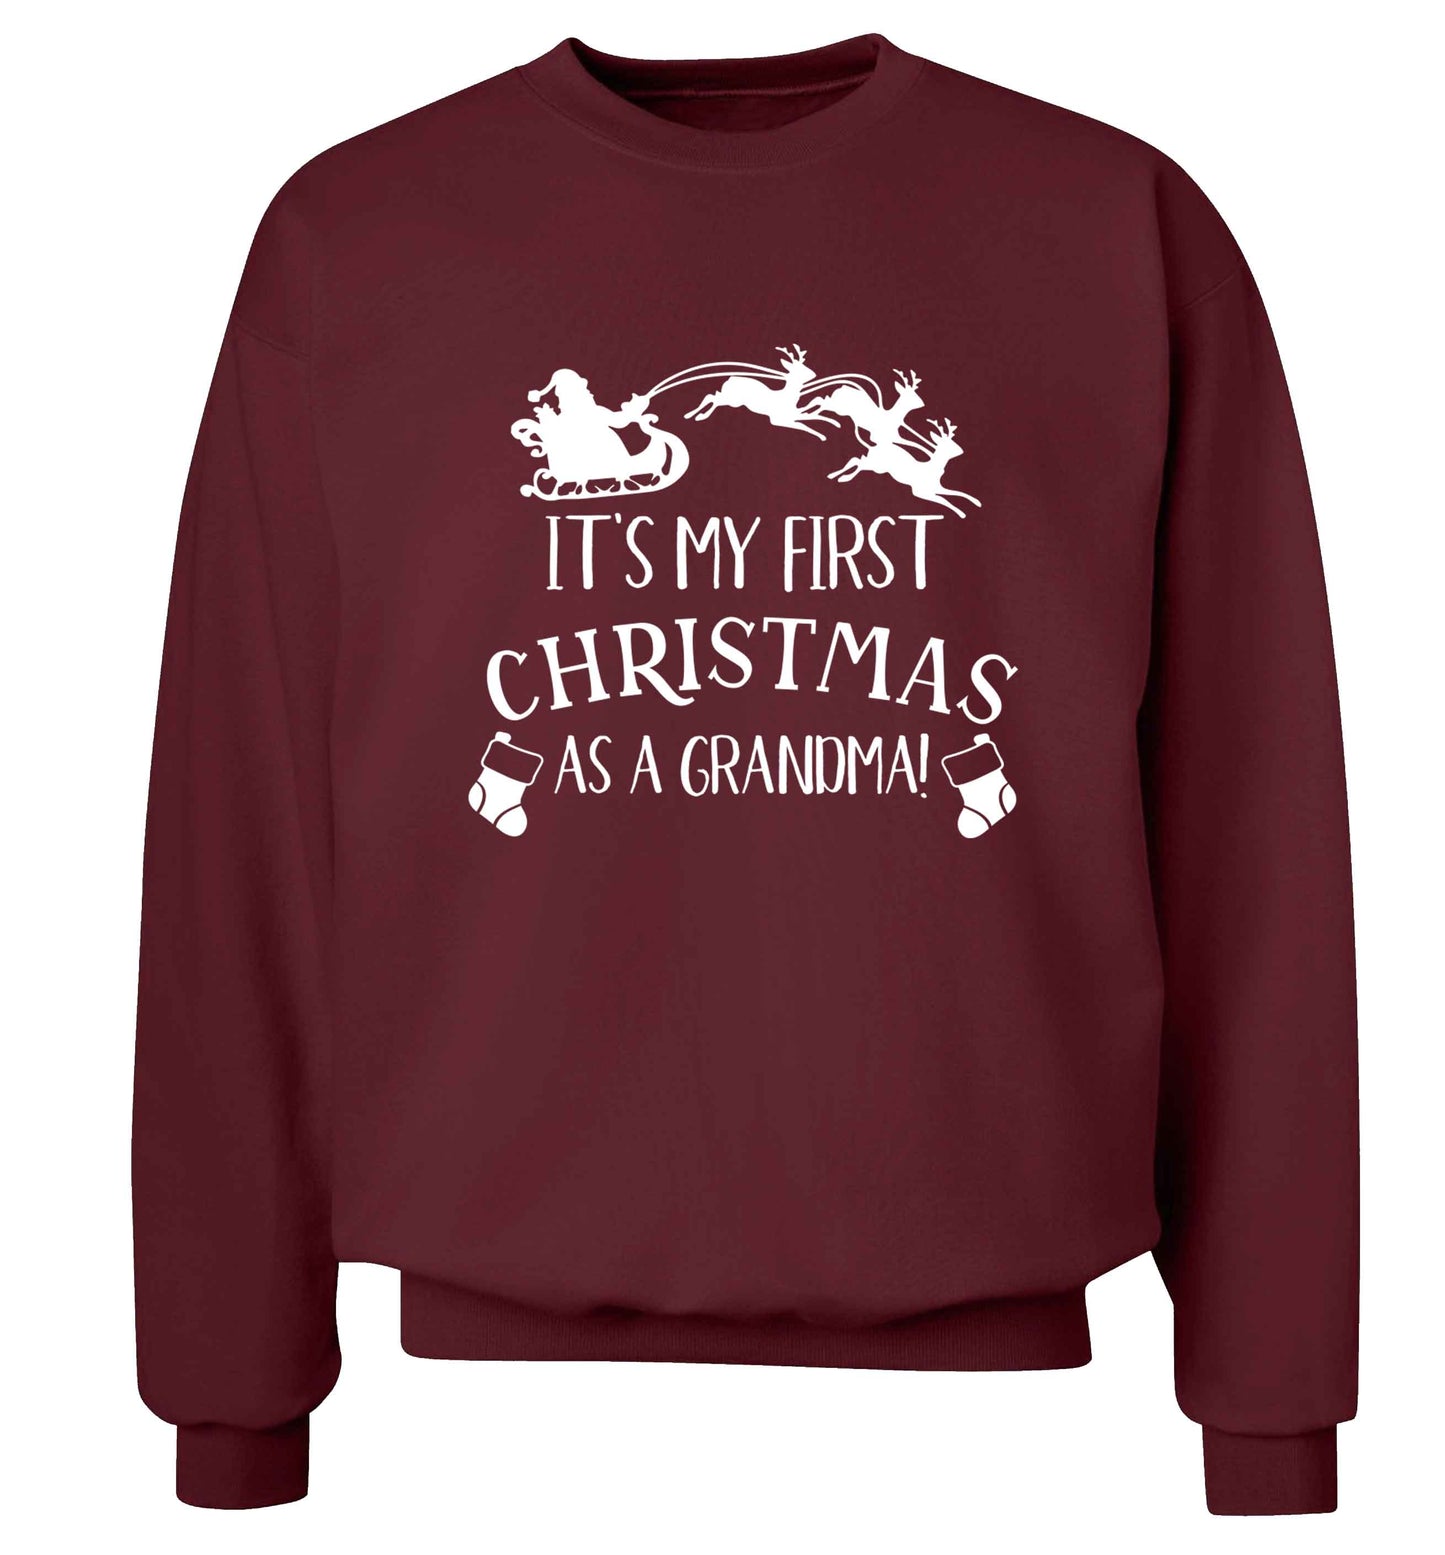 It's my first Christmas as a grandma! Adult's unisex maroon Sweater 2XL